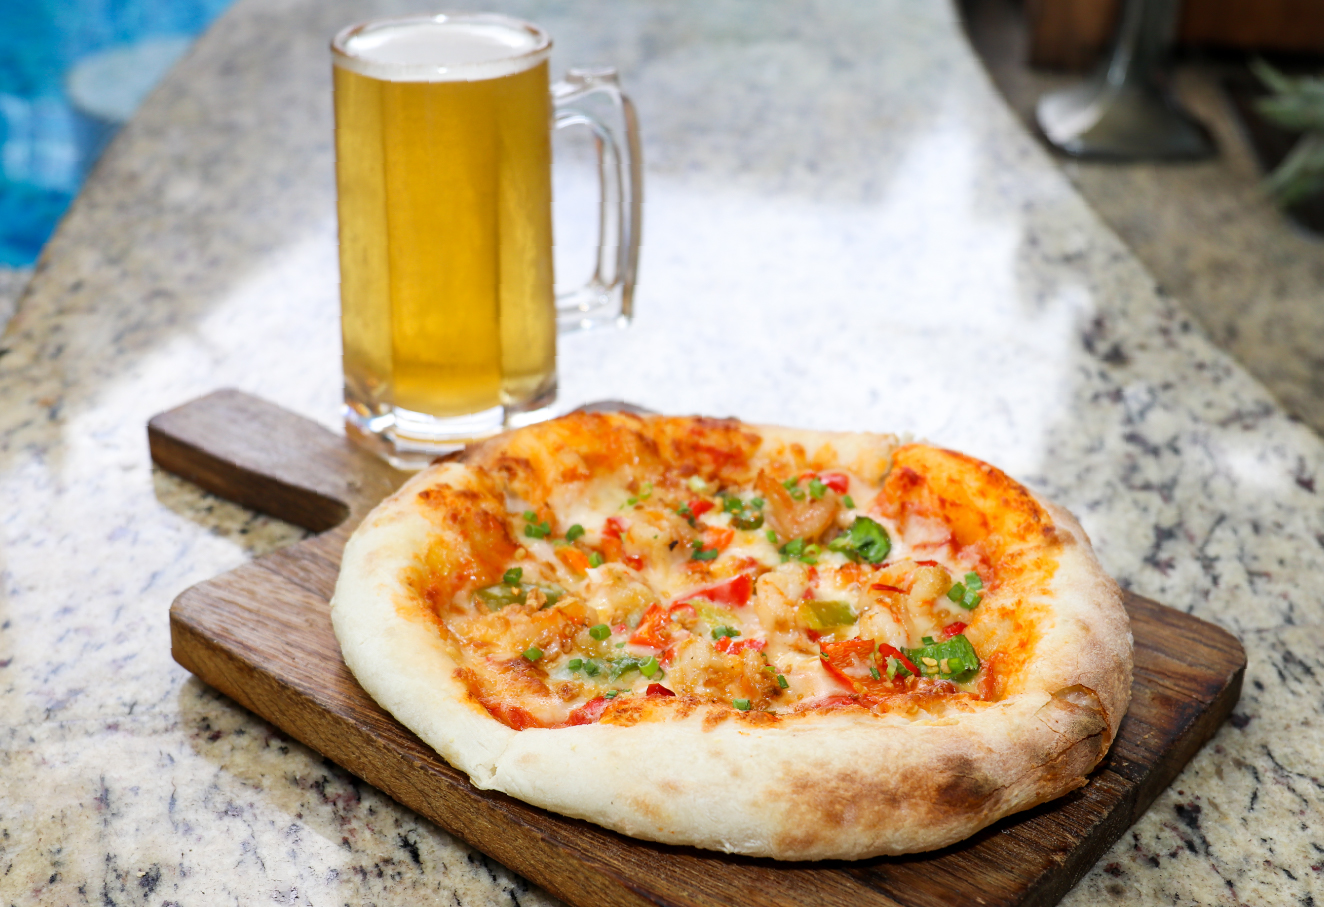 The photo shows a whole pizza and a mug of beer.